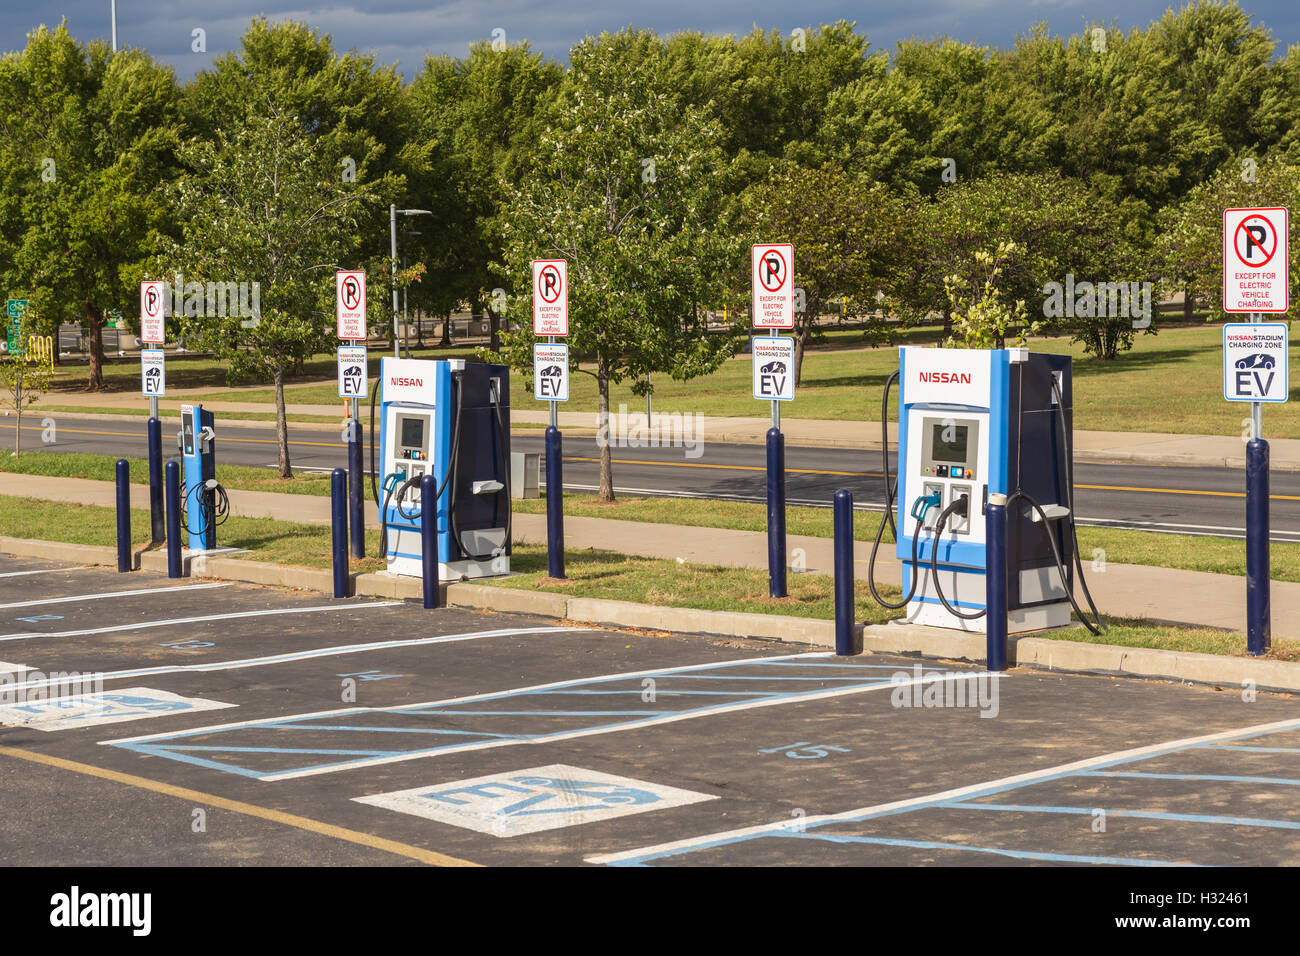 The Nissan Stadium Charging Zone, for electric vehicle charging, in a parking lot for Nissan Stadium in Nashville, Tennessee. Stock Photo